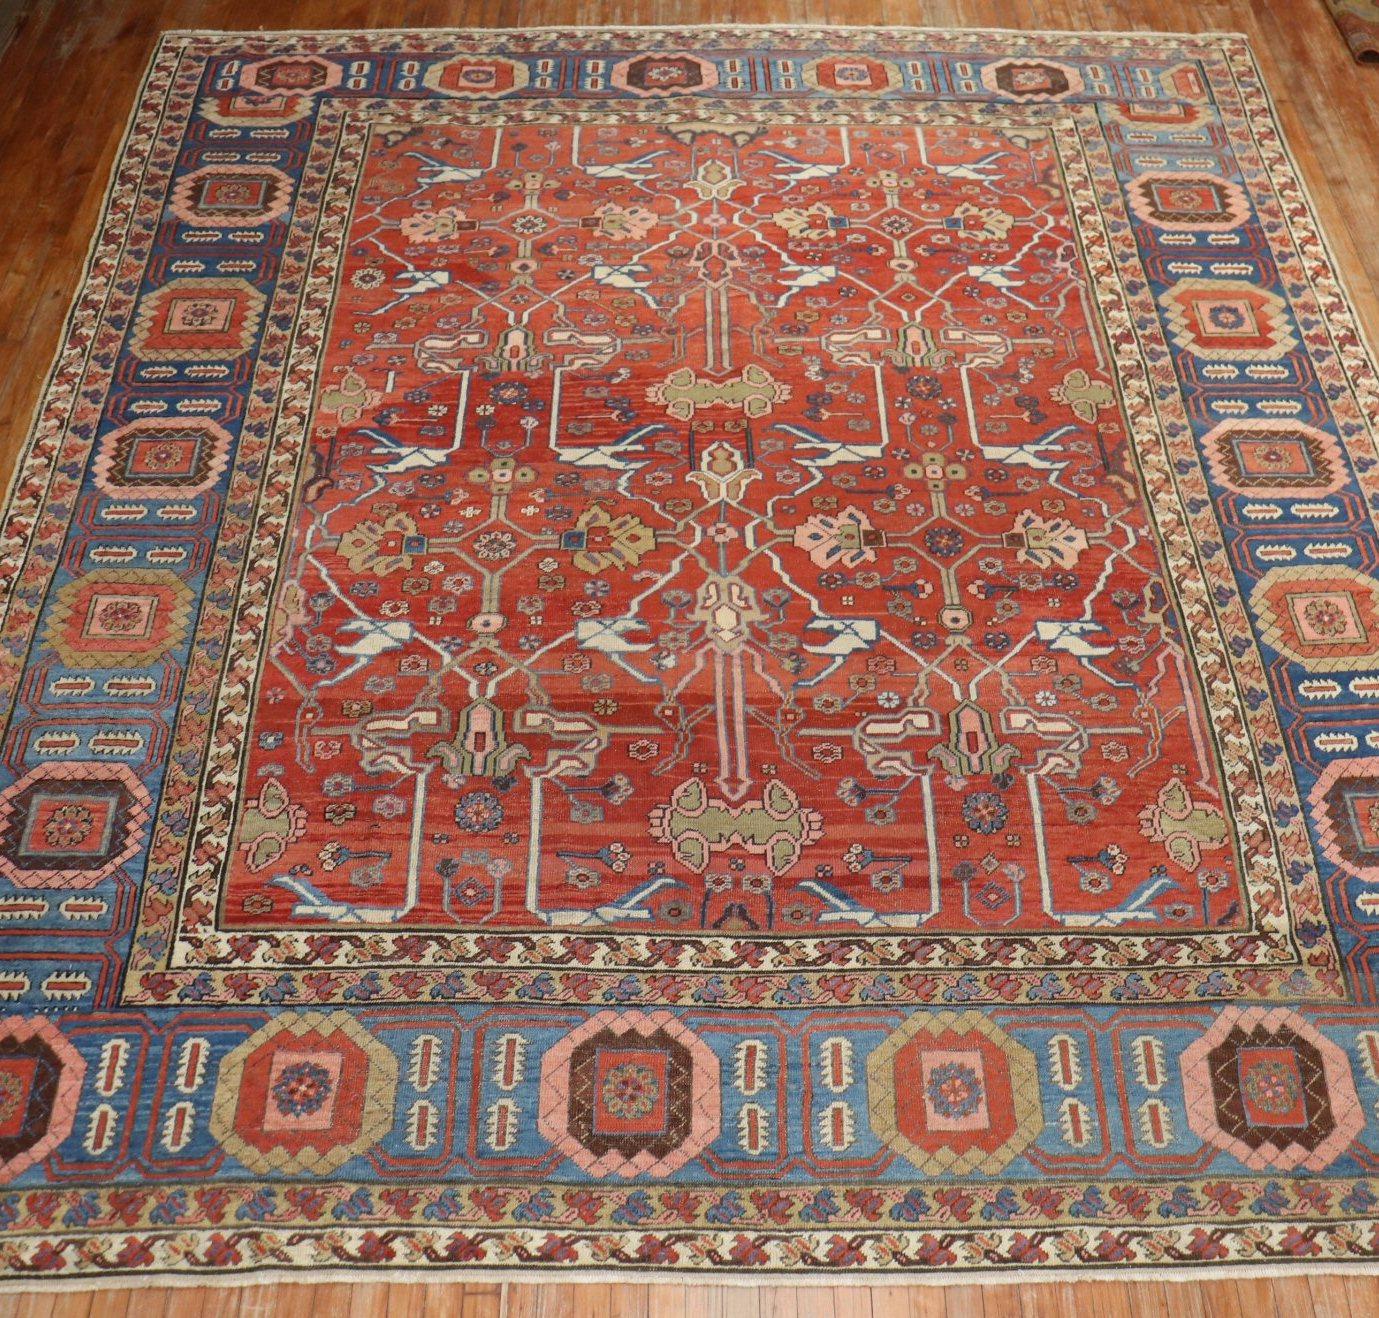 Highly collectible-quality rare square size rust all-over field 19th century Persian Bakshaish rug. The harmonious colors, skillful geometry and weavers craftsmanship make this rug an absolute work of art.

Measures: 10'7